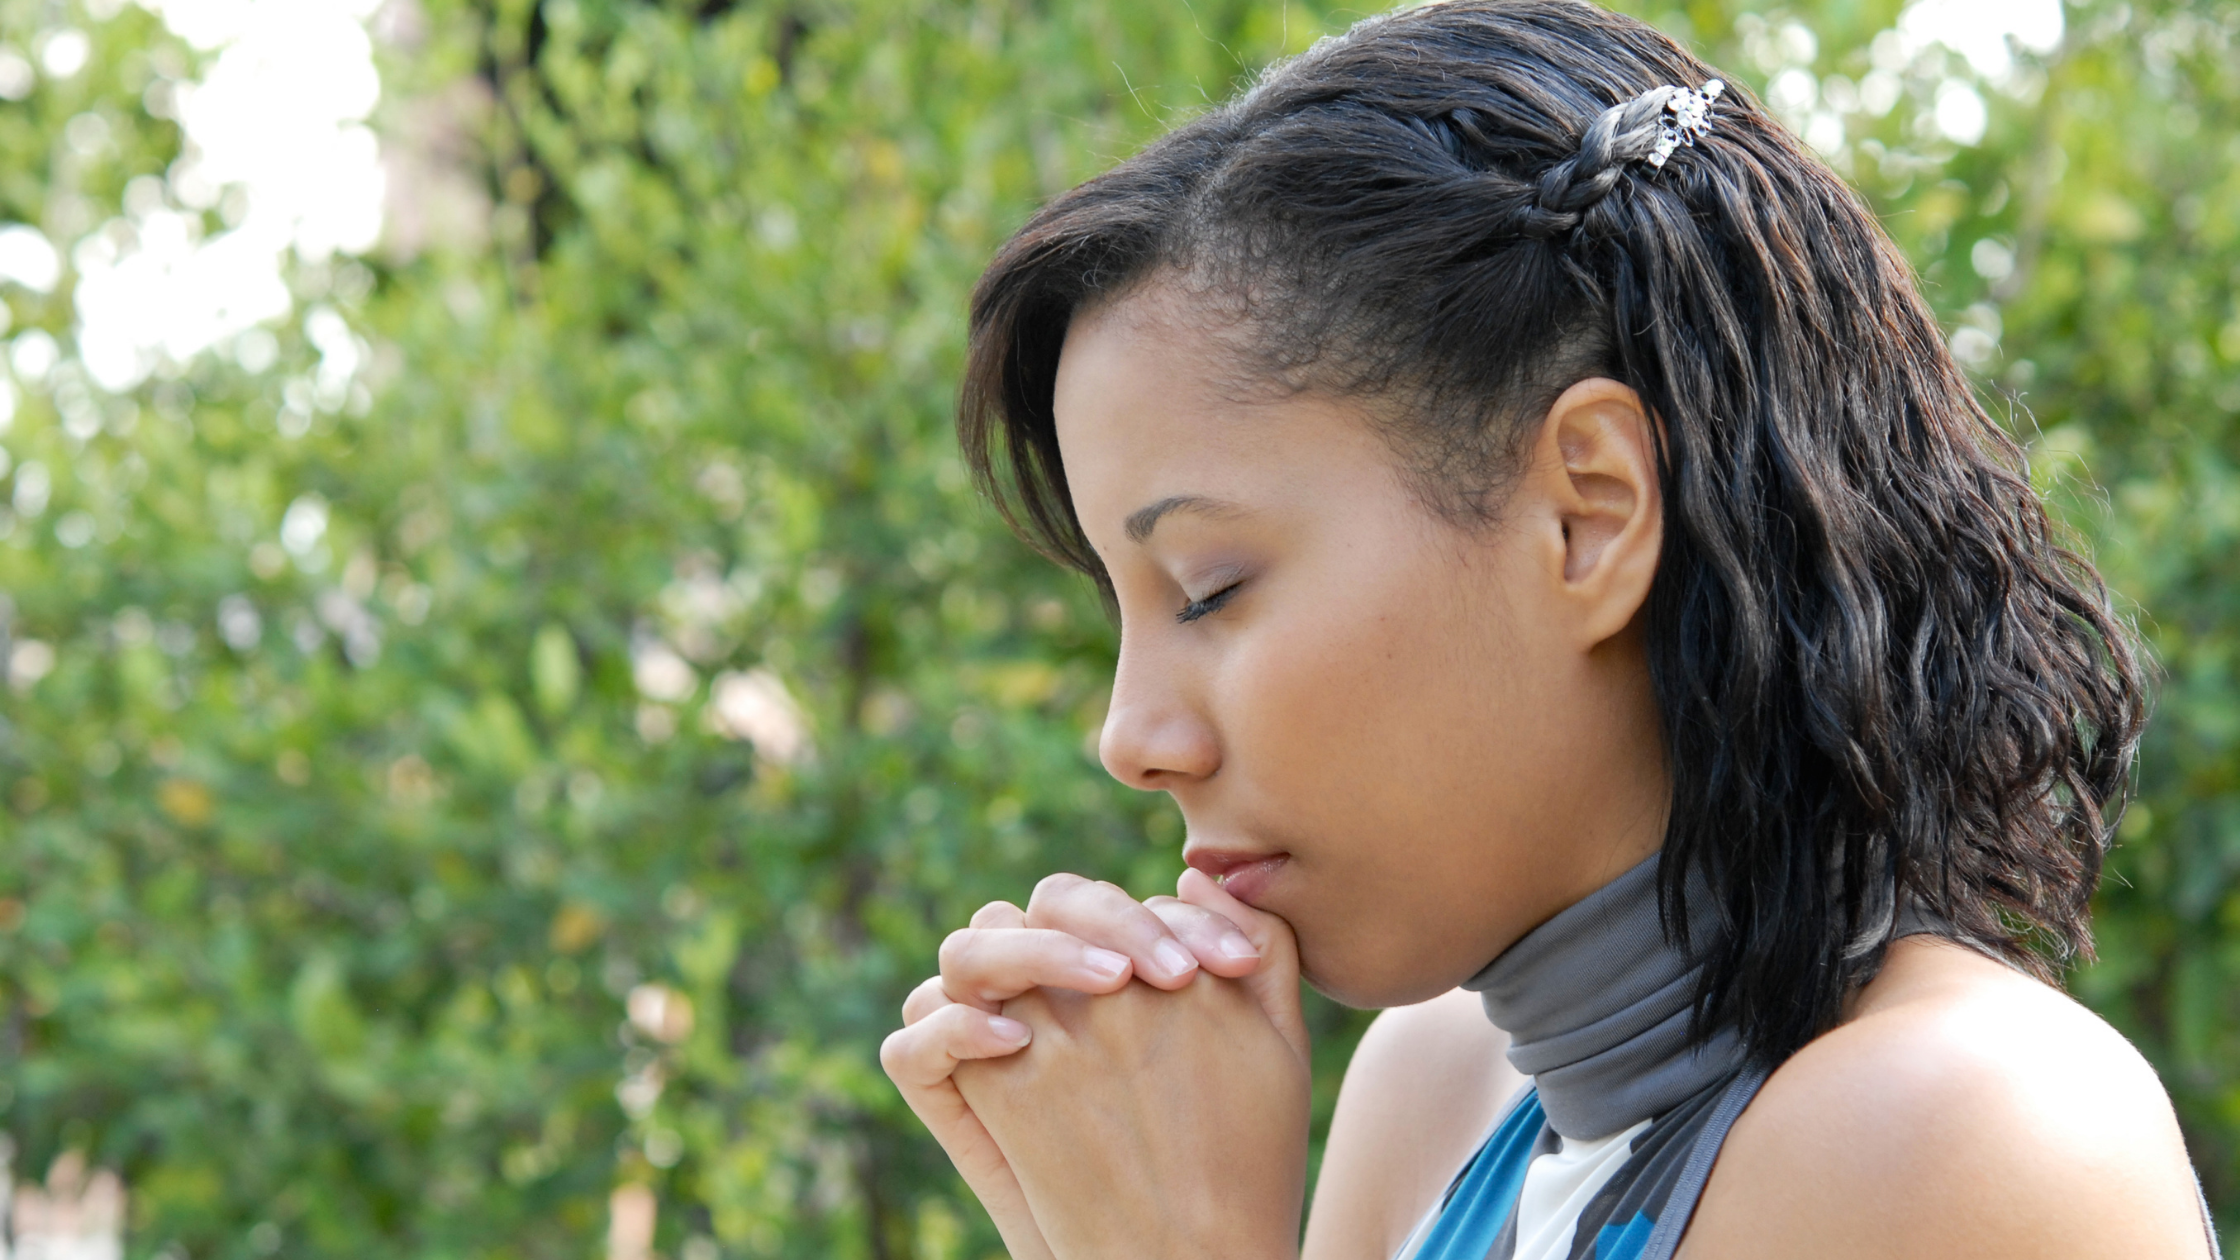 Woman praying peacefully outside in nature